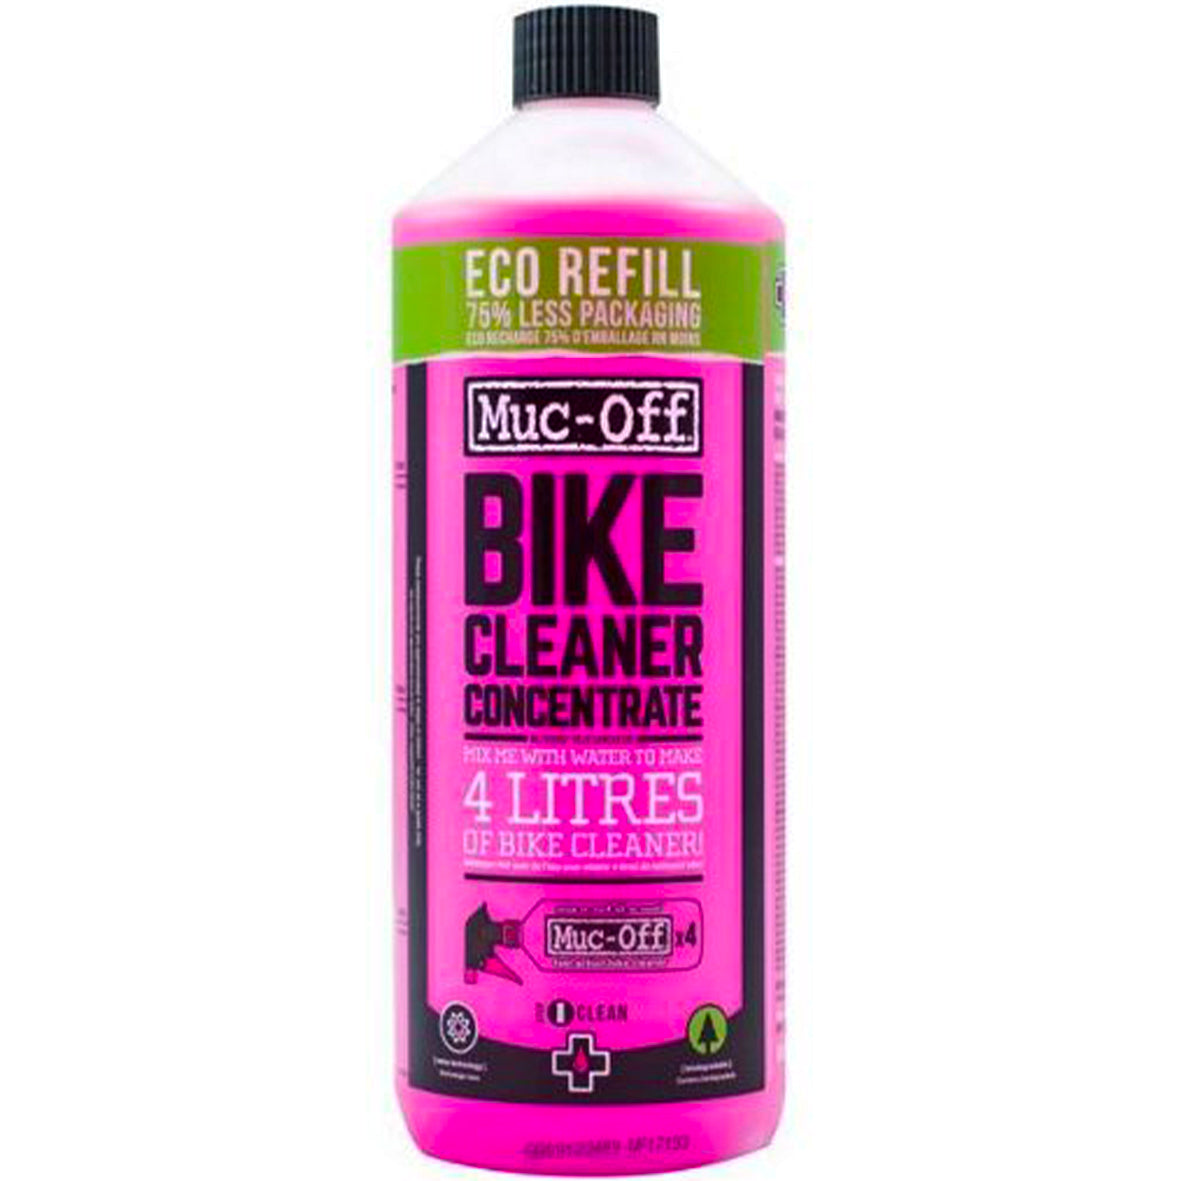 Muc-Off Bike Cleaner Concentrate Eco Refill - Makes 4 litres (1 Litre)